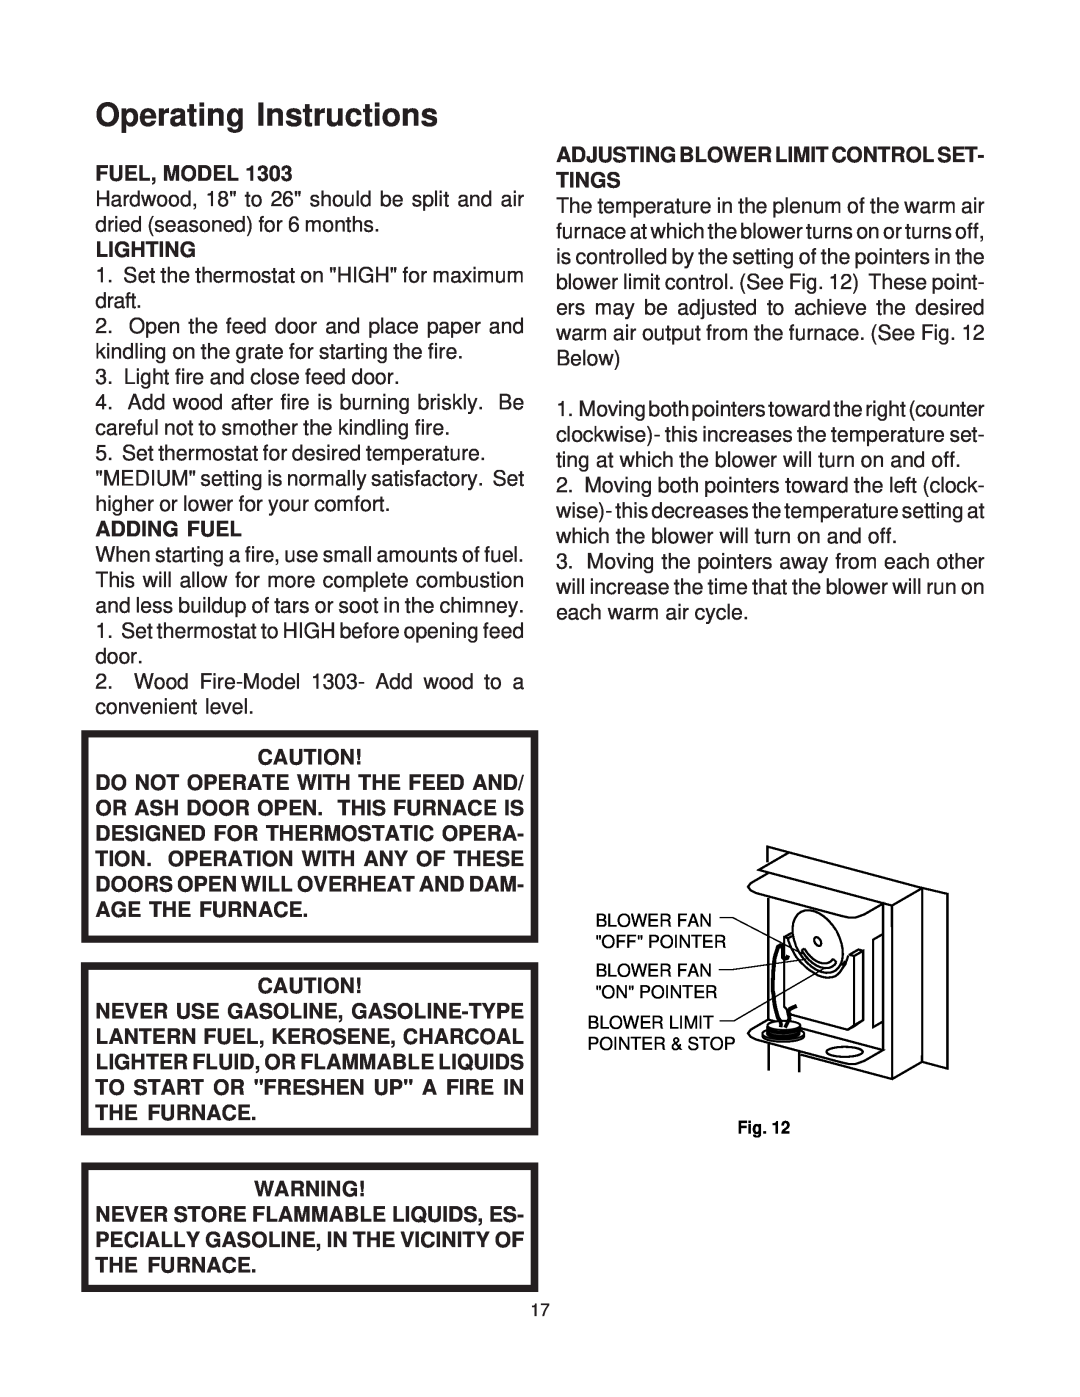 United States Stove AIR, 1303 warranty Operating Instructions, Fuel, Model, Lighting, Adding Fuel 